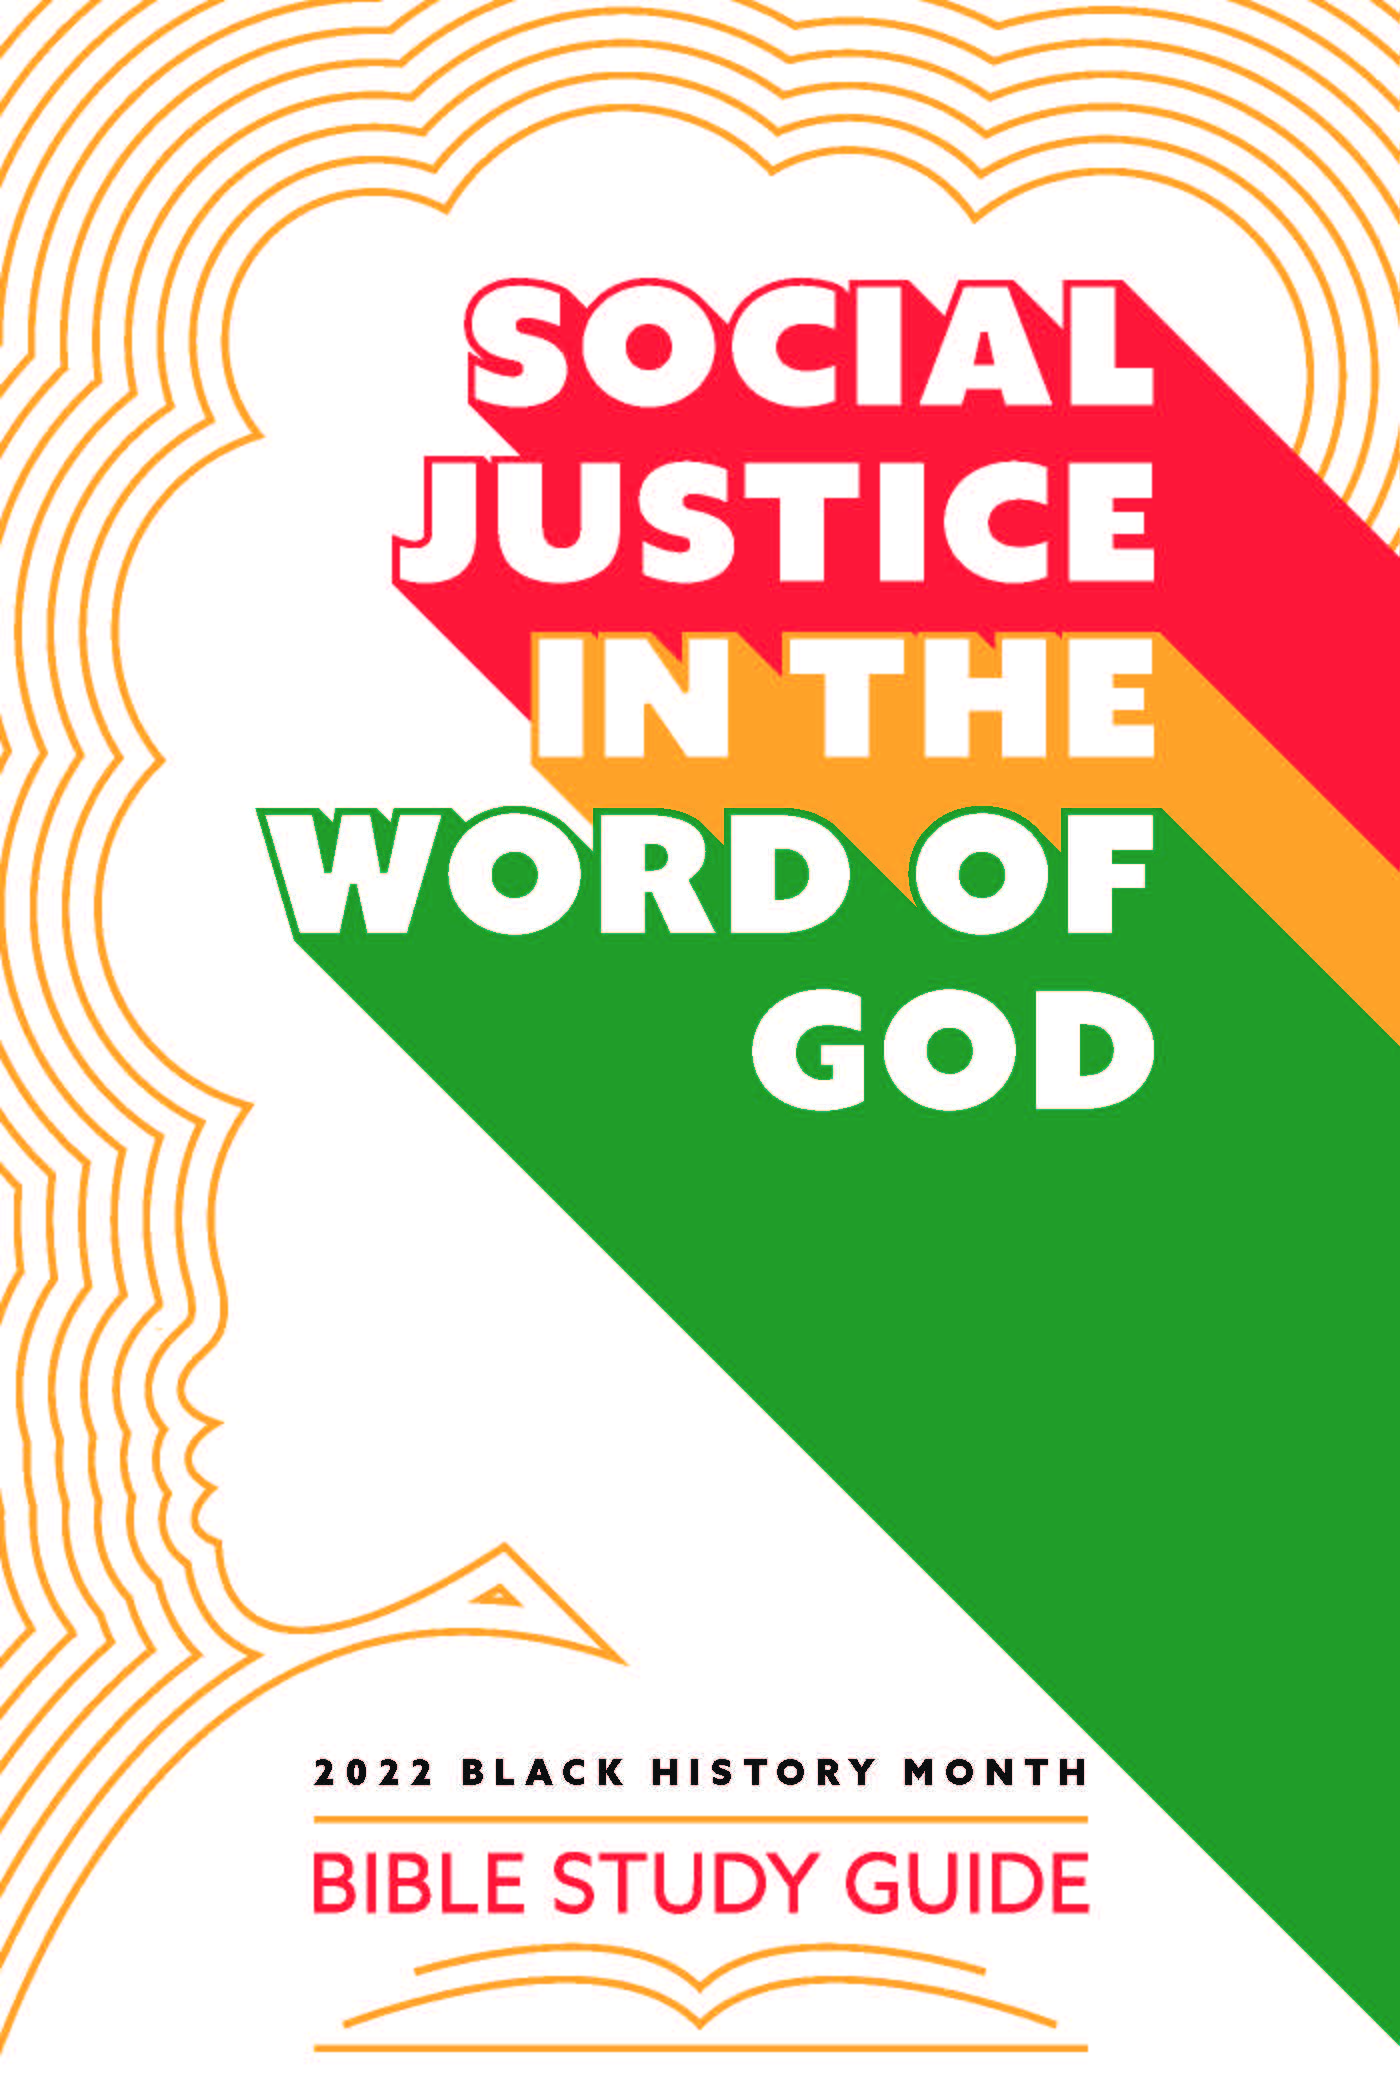 Cover of the "Social Justice in the Word of God" Black History Month Bible Study Guide